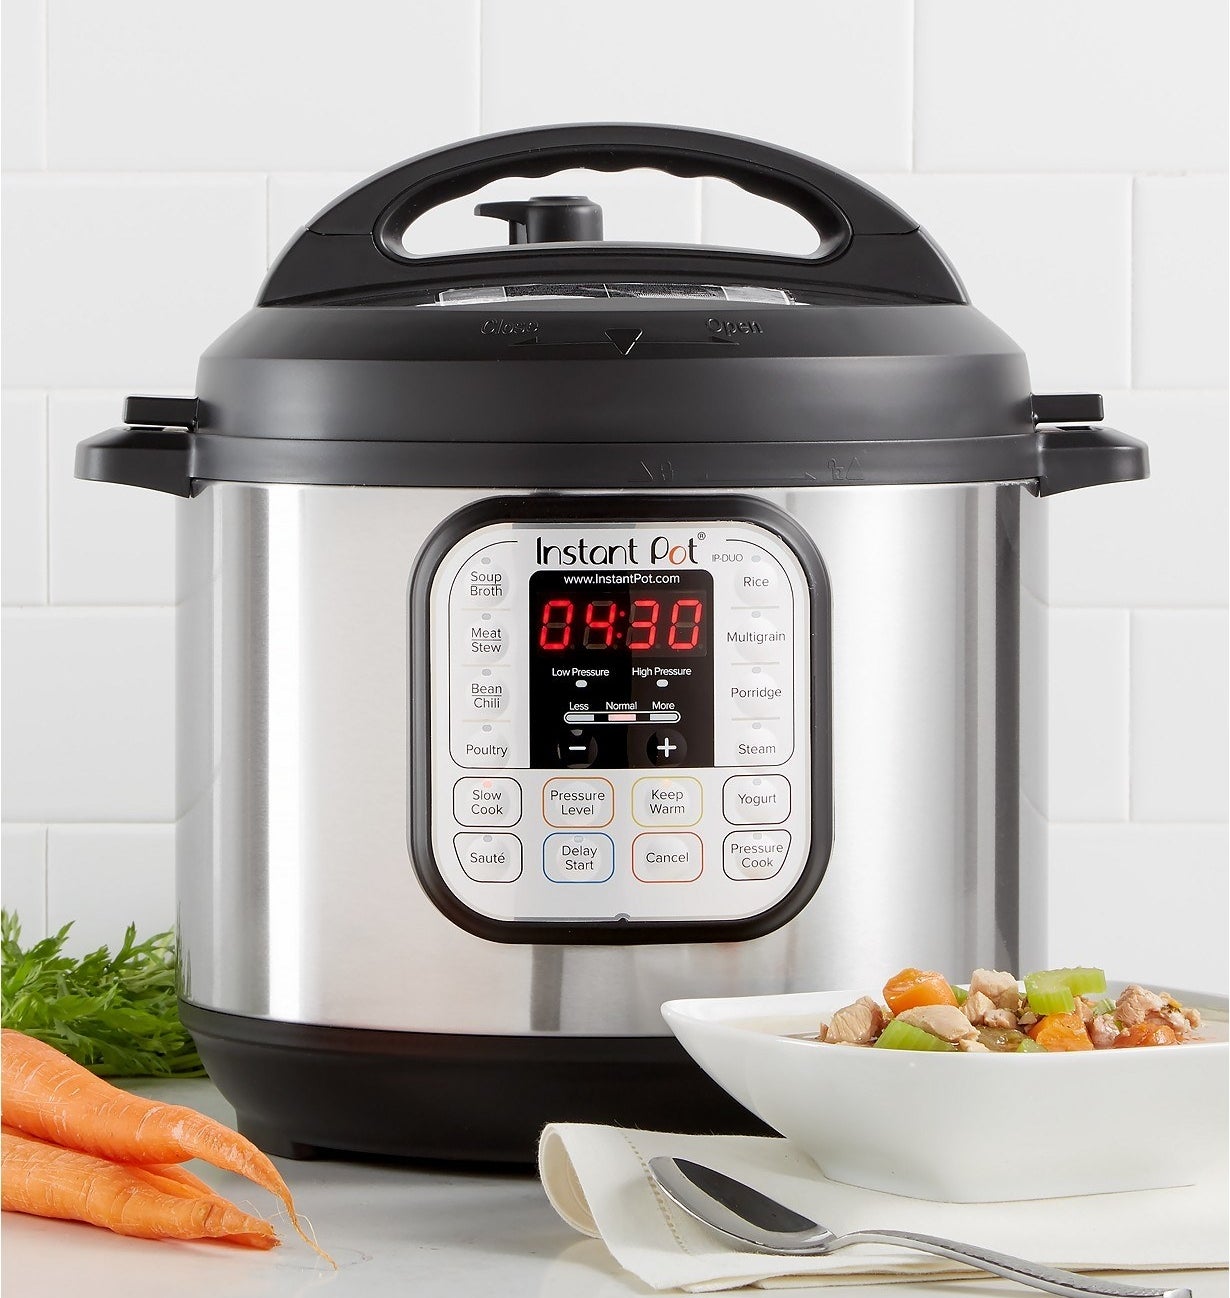 The Instant Pot, featuring a digital display